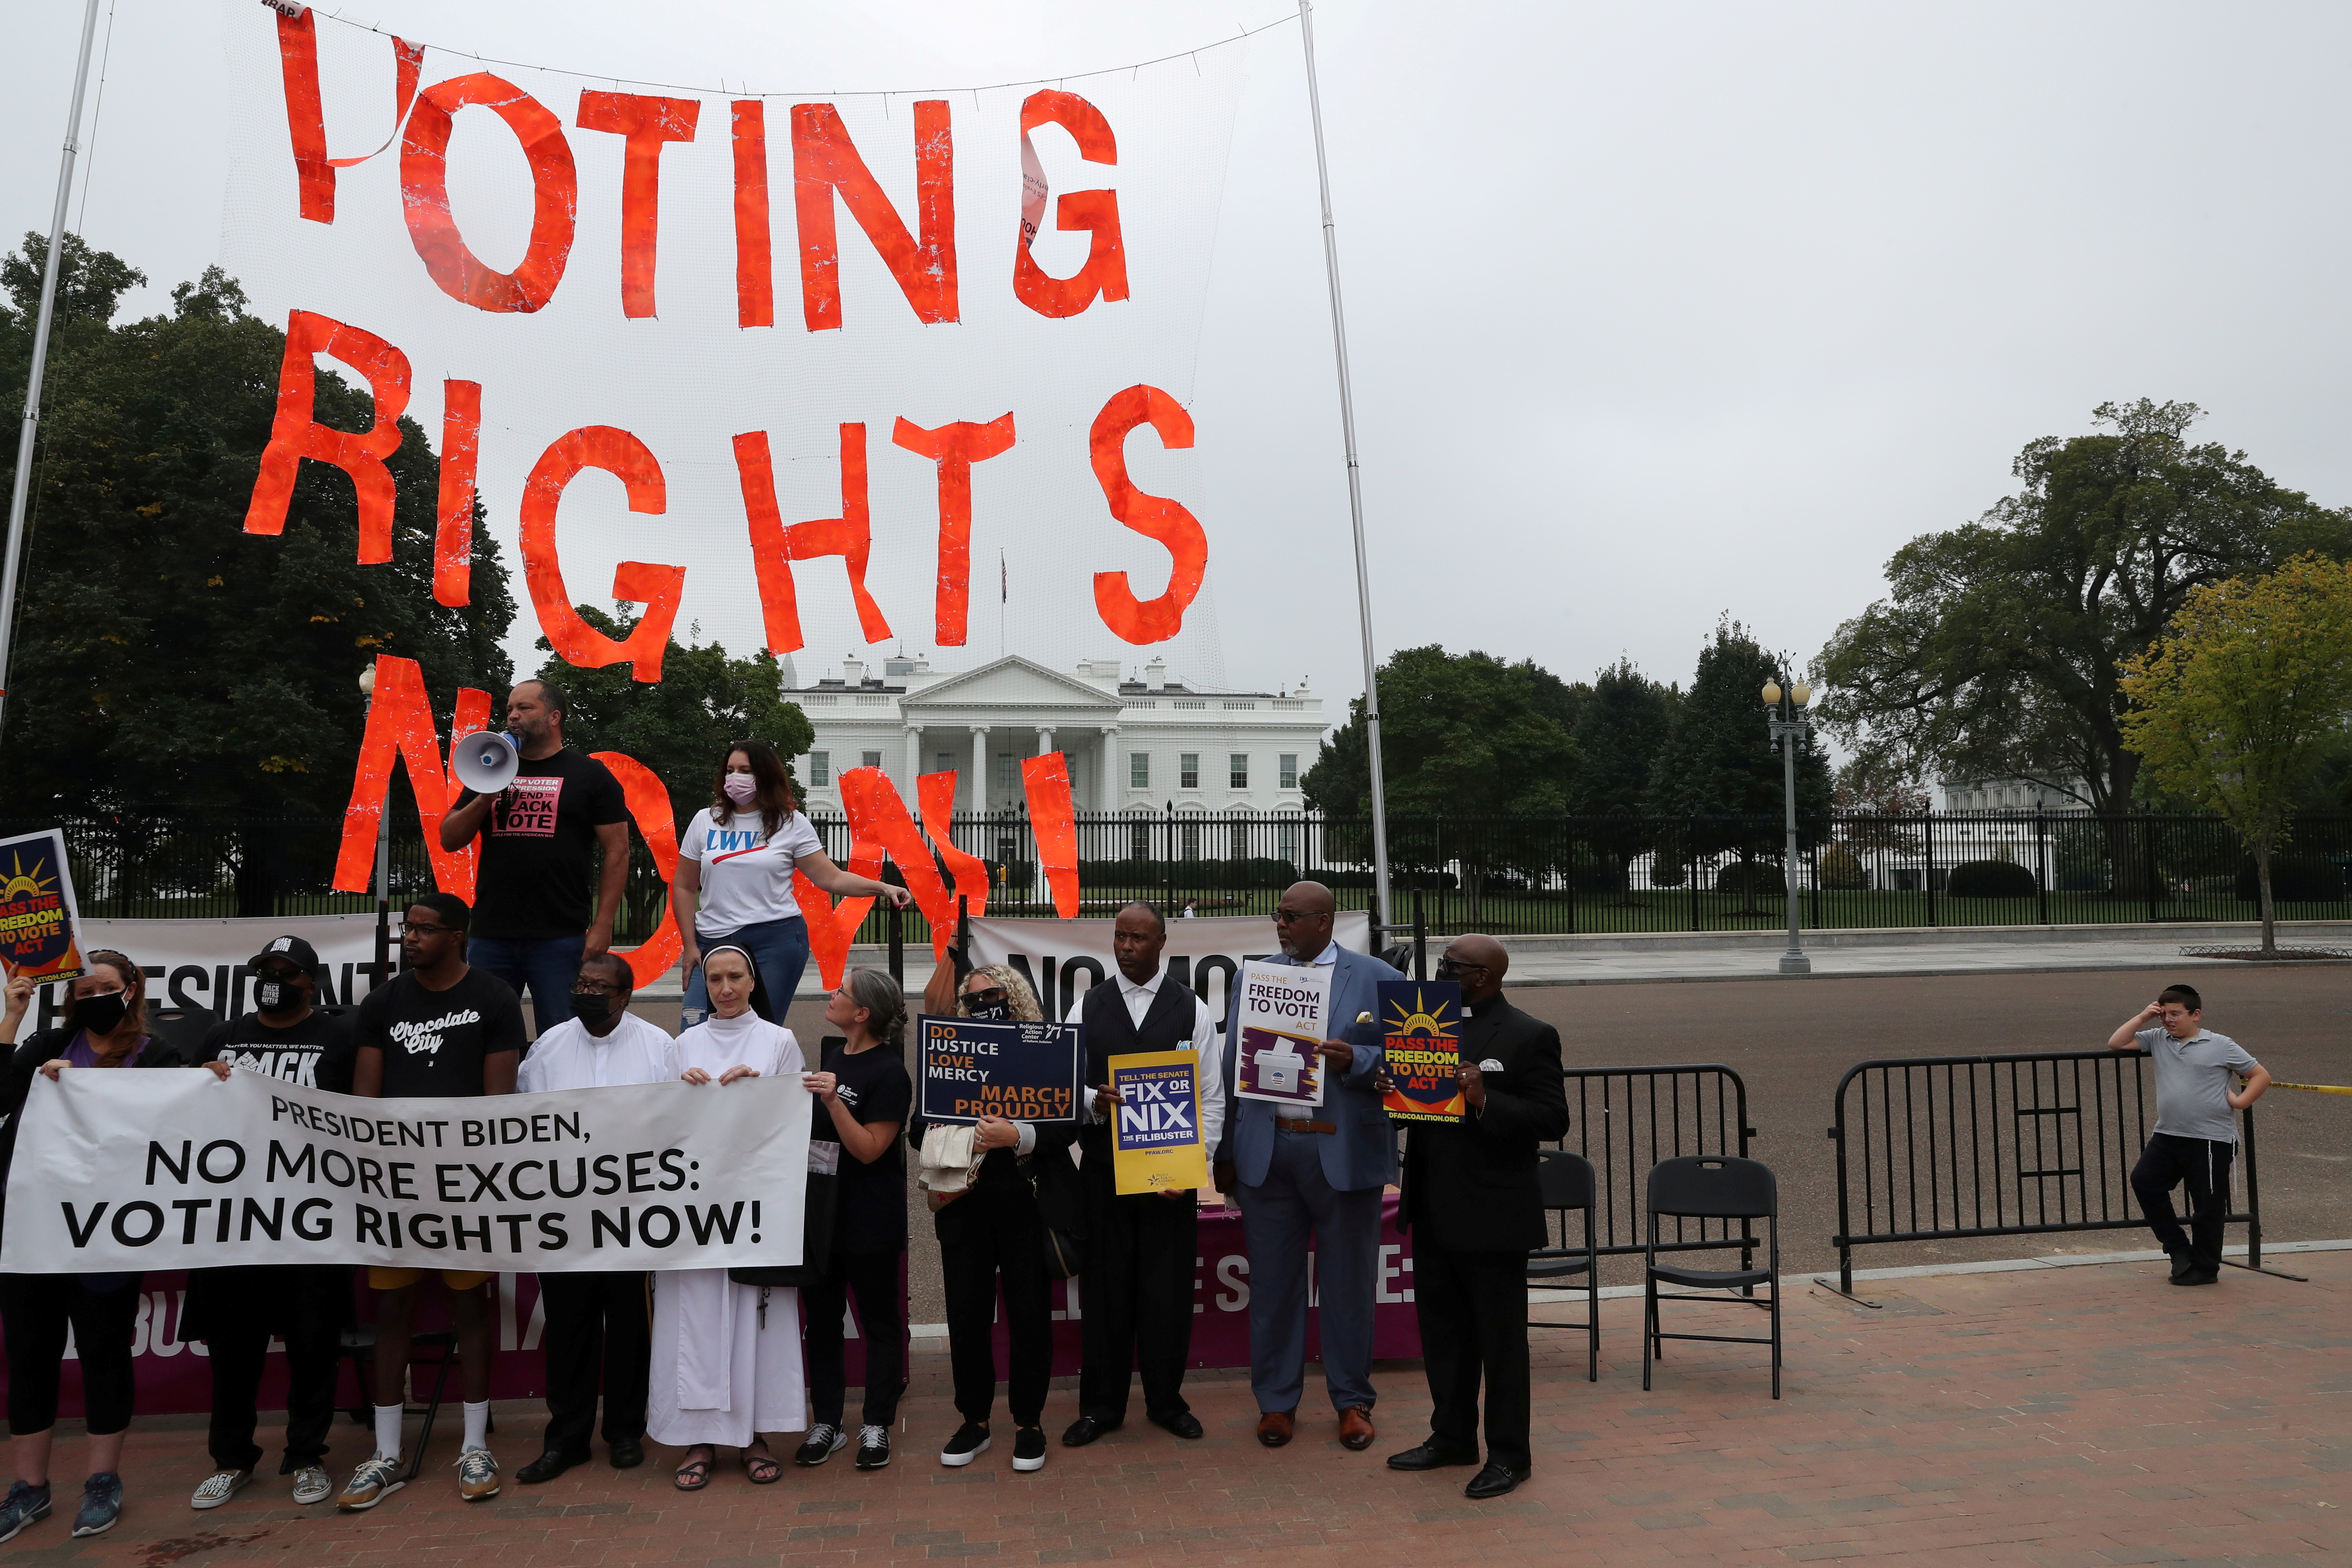 People protest for voting rights in Lafayette Park outside of the White House in Washington, U.S., October 5, 2021. REUTERS/Leah Millis